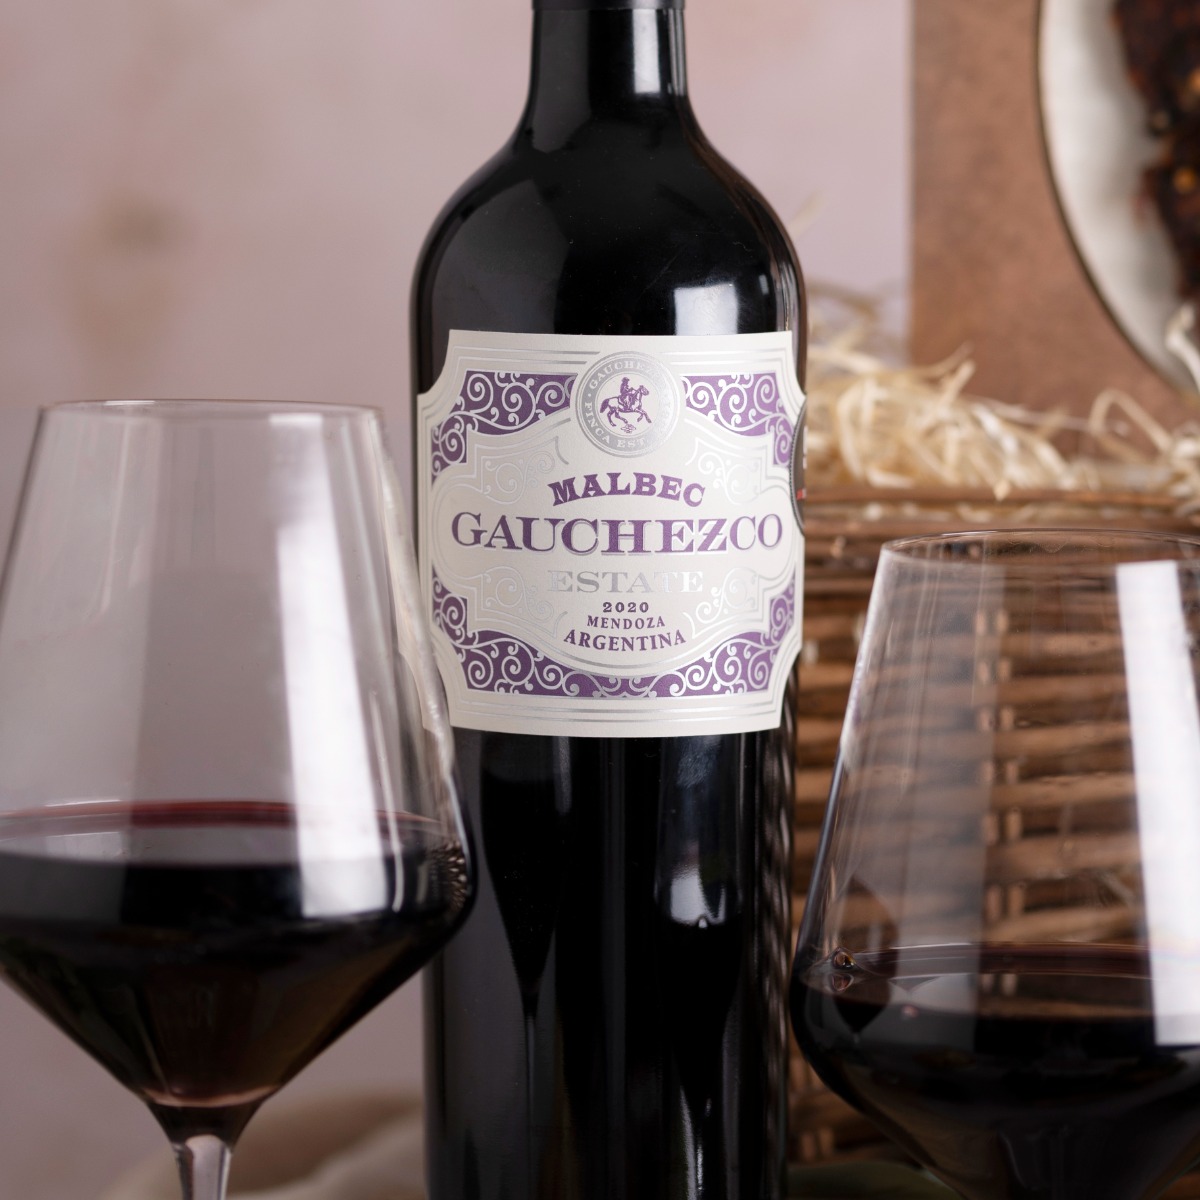 A close up of a bottle and glass of Gauchezco red wine